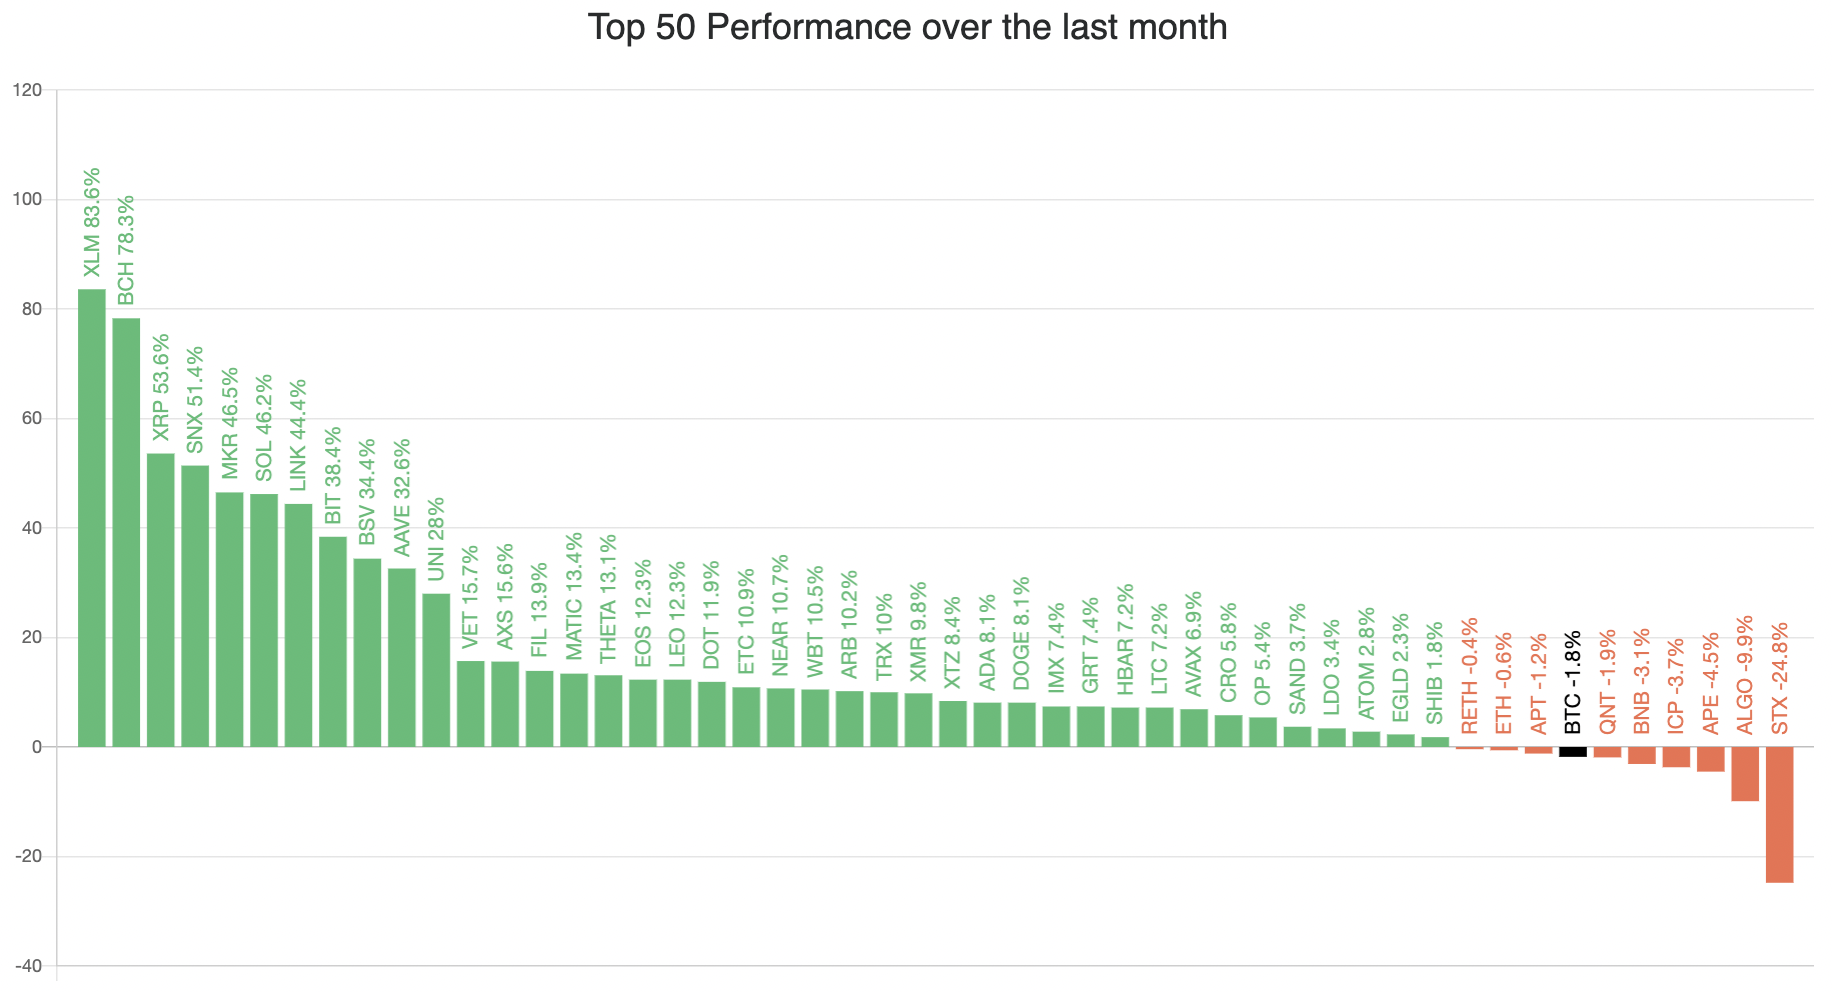 Top 50 altcoins performance tracked by Blockchaincenter.net